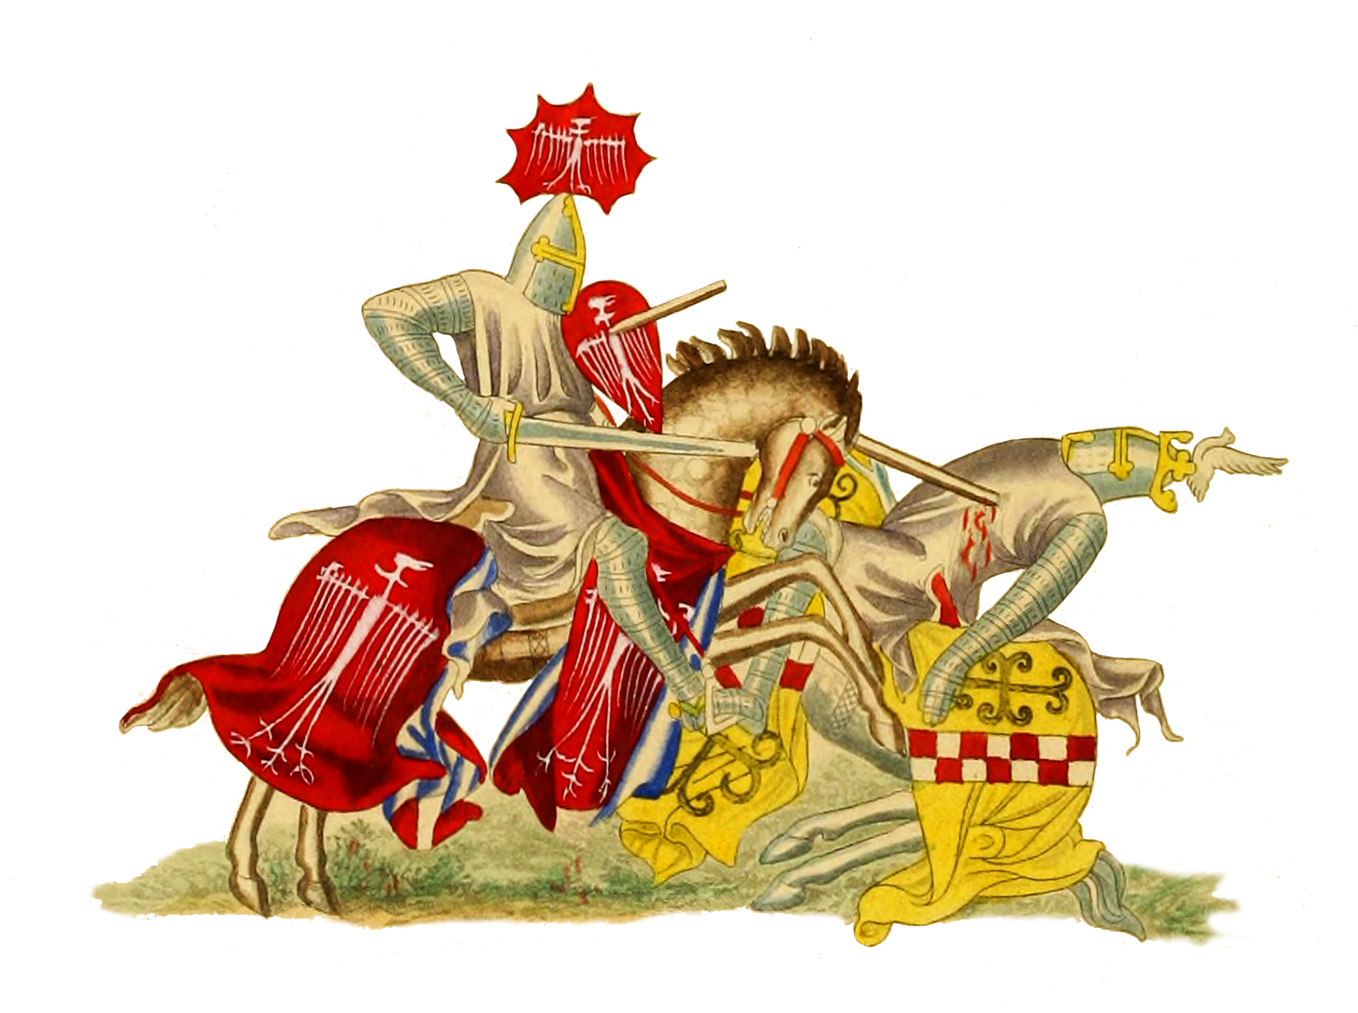 knights clipart england medieval